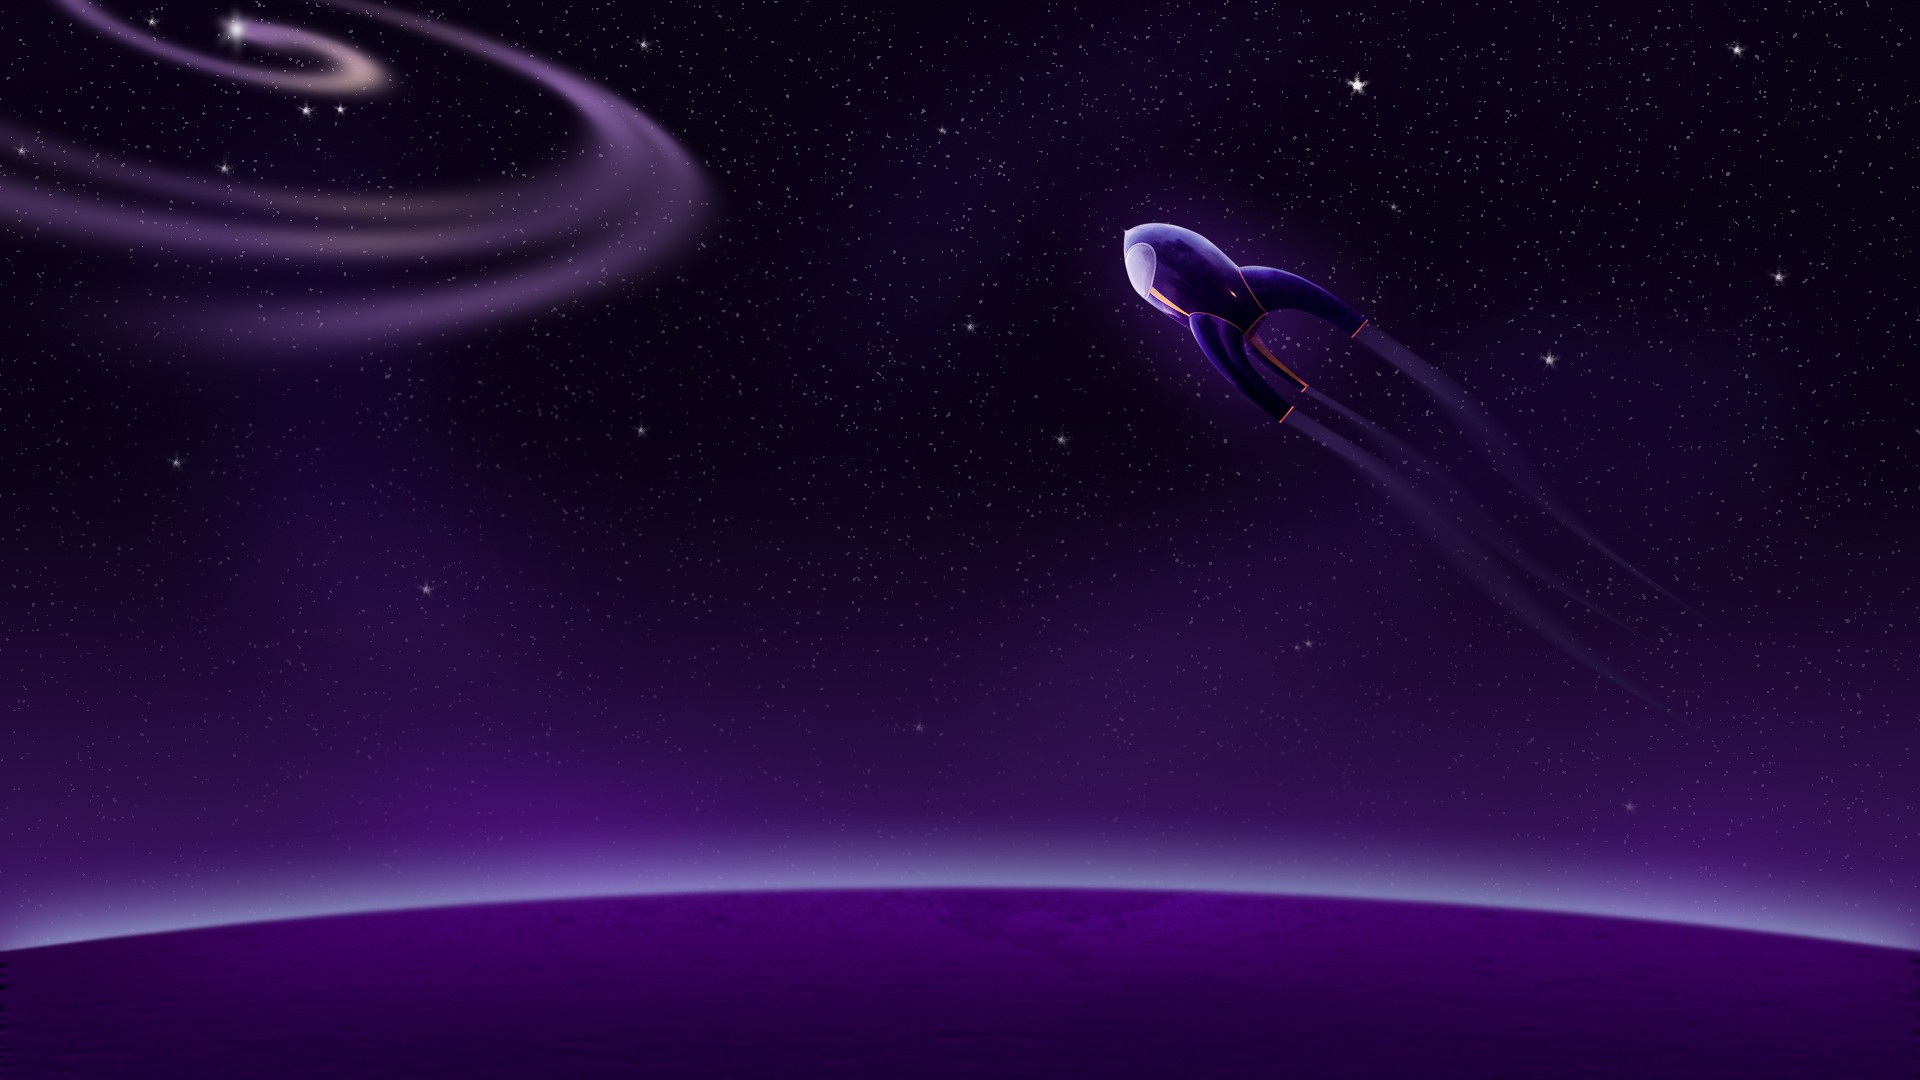 outer, Space, Pattern, Stars, Flying, Purple, Vehicles, Rocket, Space, Vehicle Wallpaper